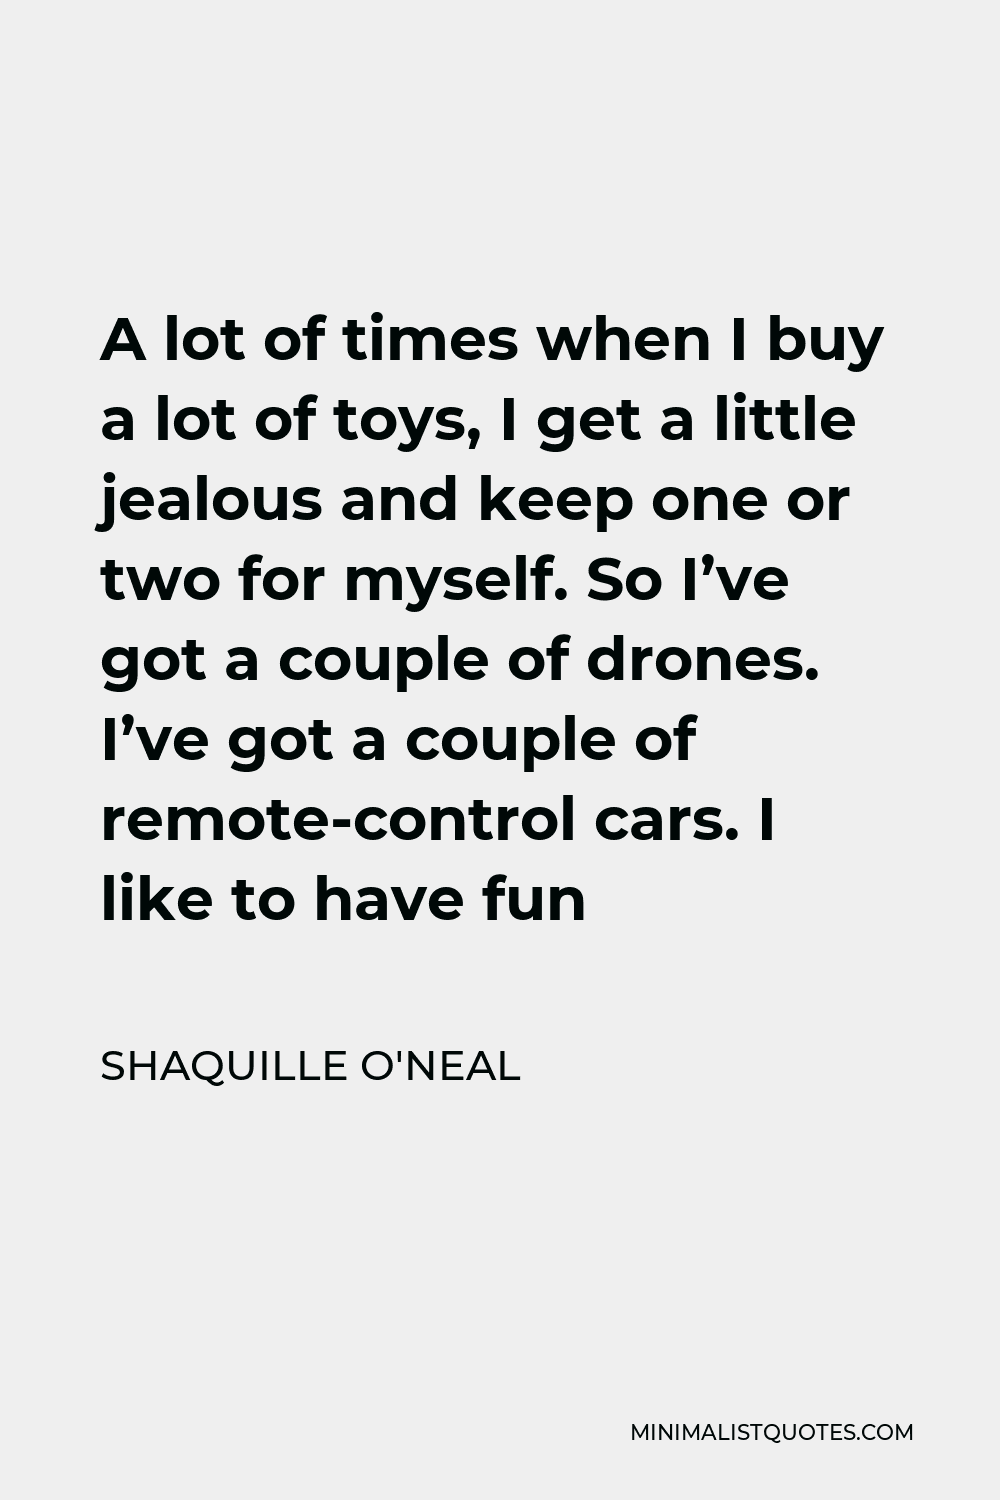 Shaquille O'Neal Quote - A lot of times when I buy a lot of toys, I get a little jealous and keep one or two for myself. So I’ve got a couple of drones. I’ve got a couple of remote-control cars. I like to have fun